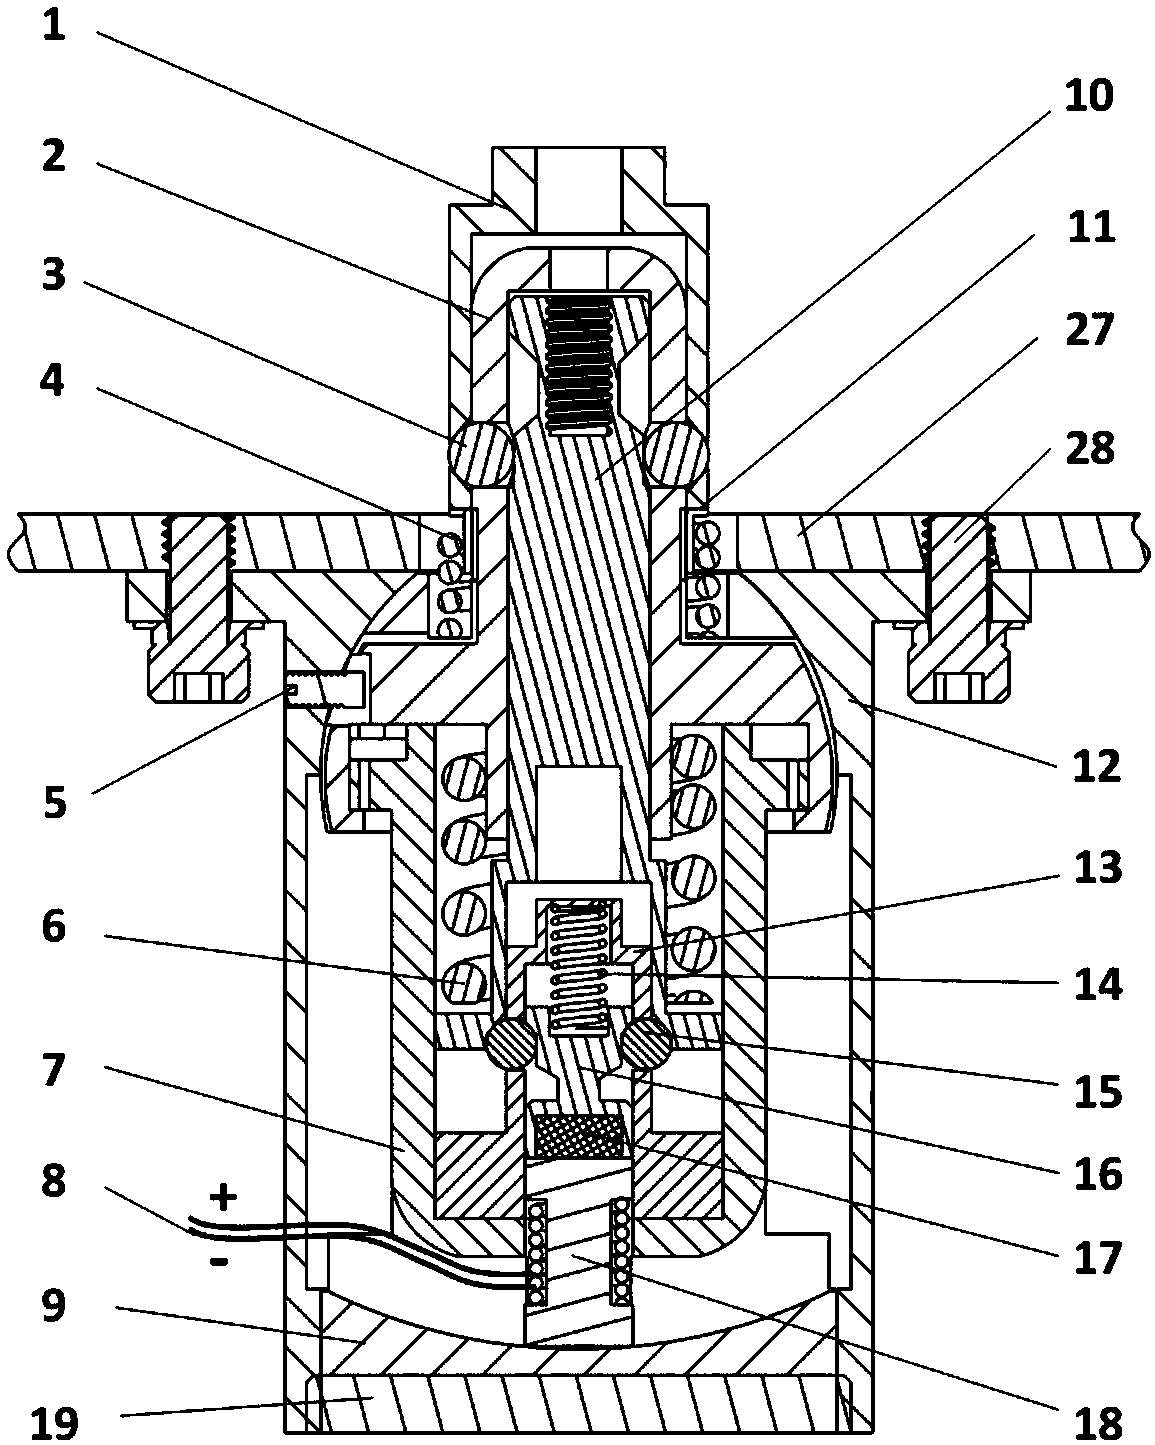 Non-fire-worker-driven two-stage compressing releasing mechanism